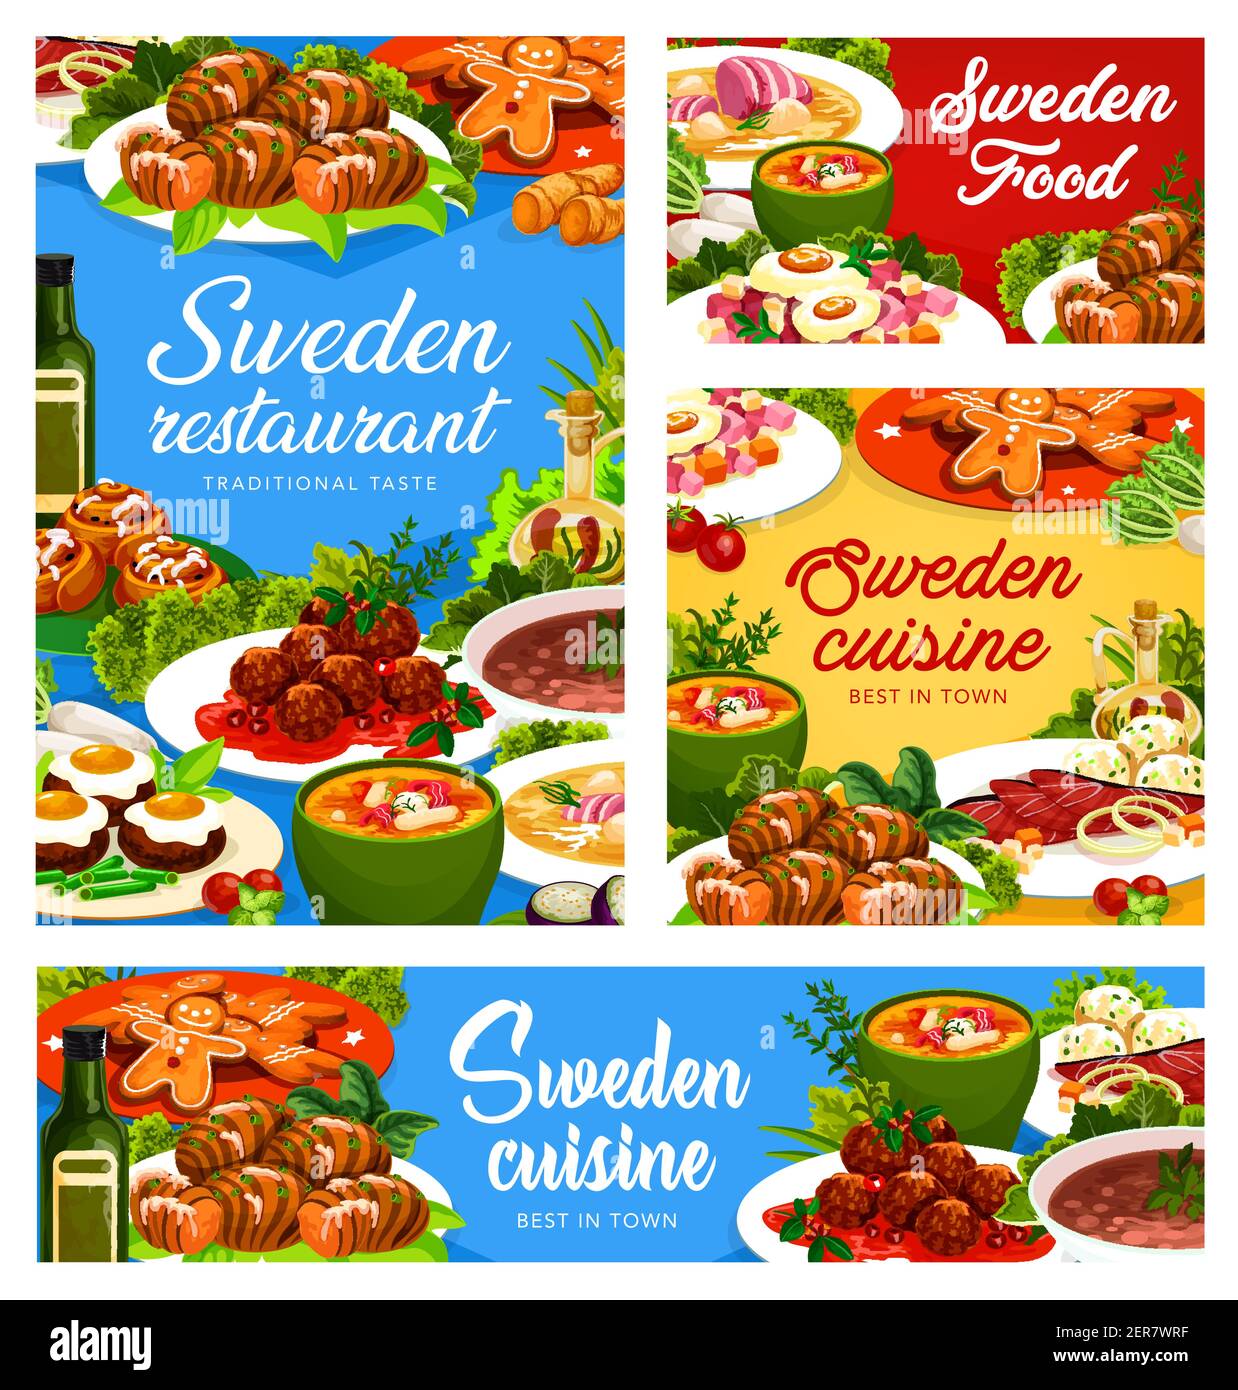 Sweden dishes vector beefsteak a la lindstrom, beef soup elebsad and salmon soup. Pittipanka, meatballs kottbulars, potato hassel and gravlax with gin Stock Vector